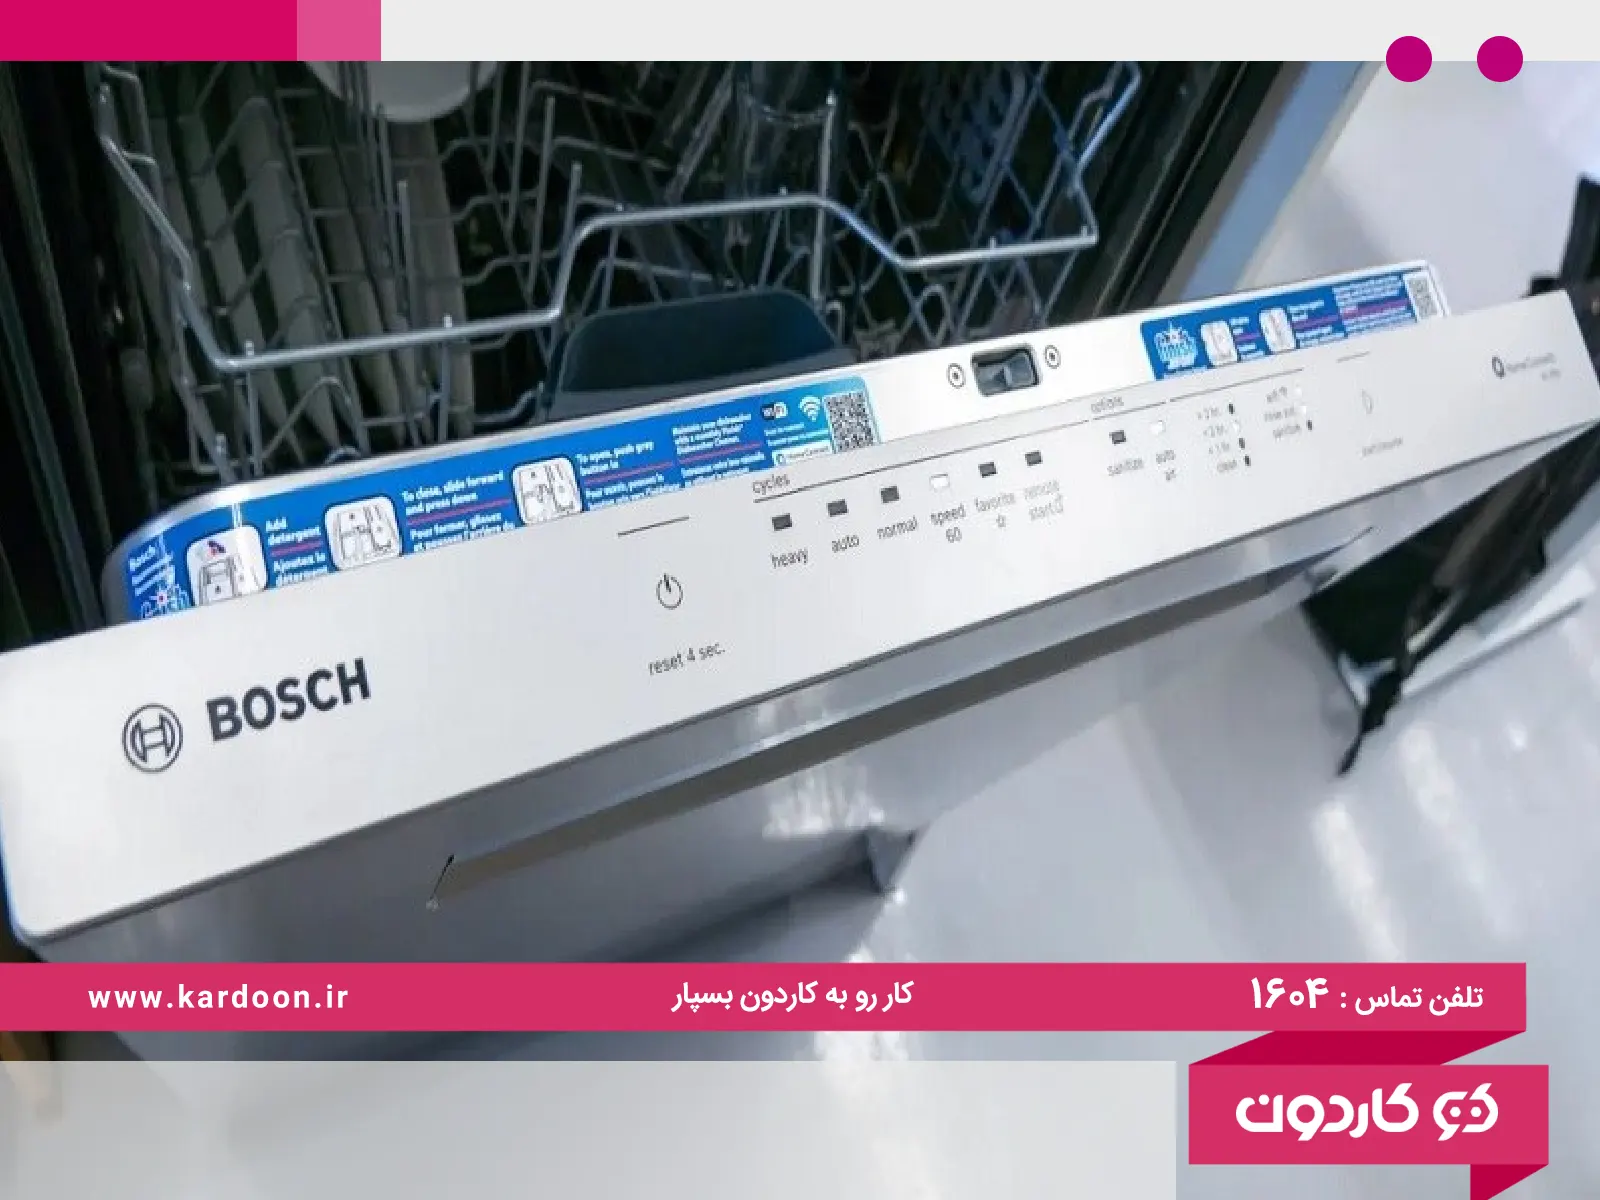 The meaning of the buttons on the Bosch dishwasher